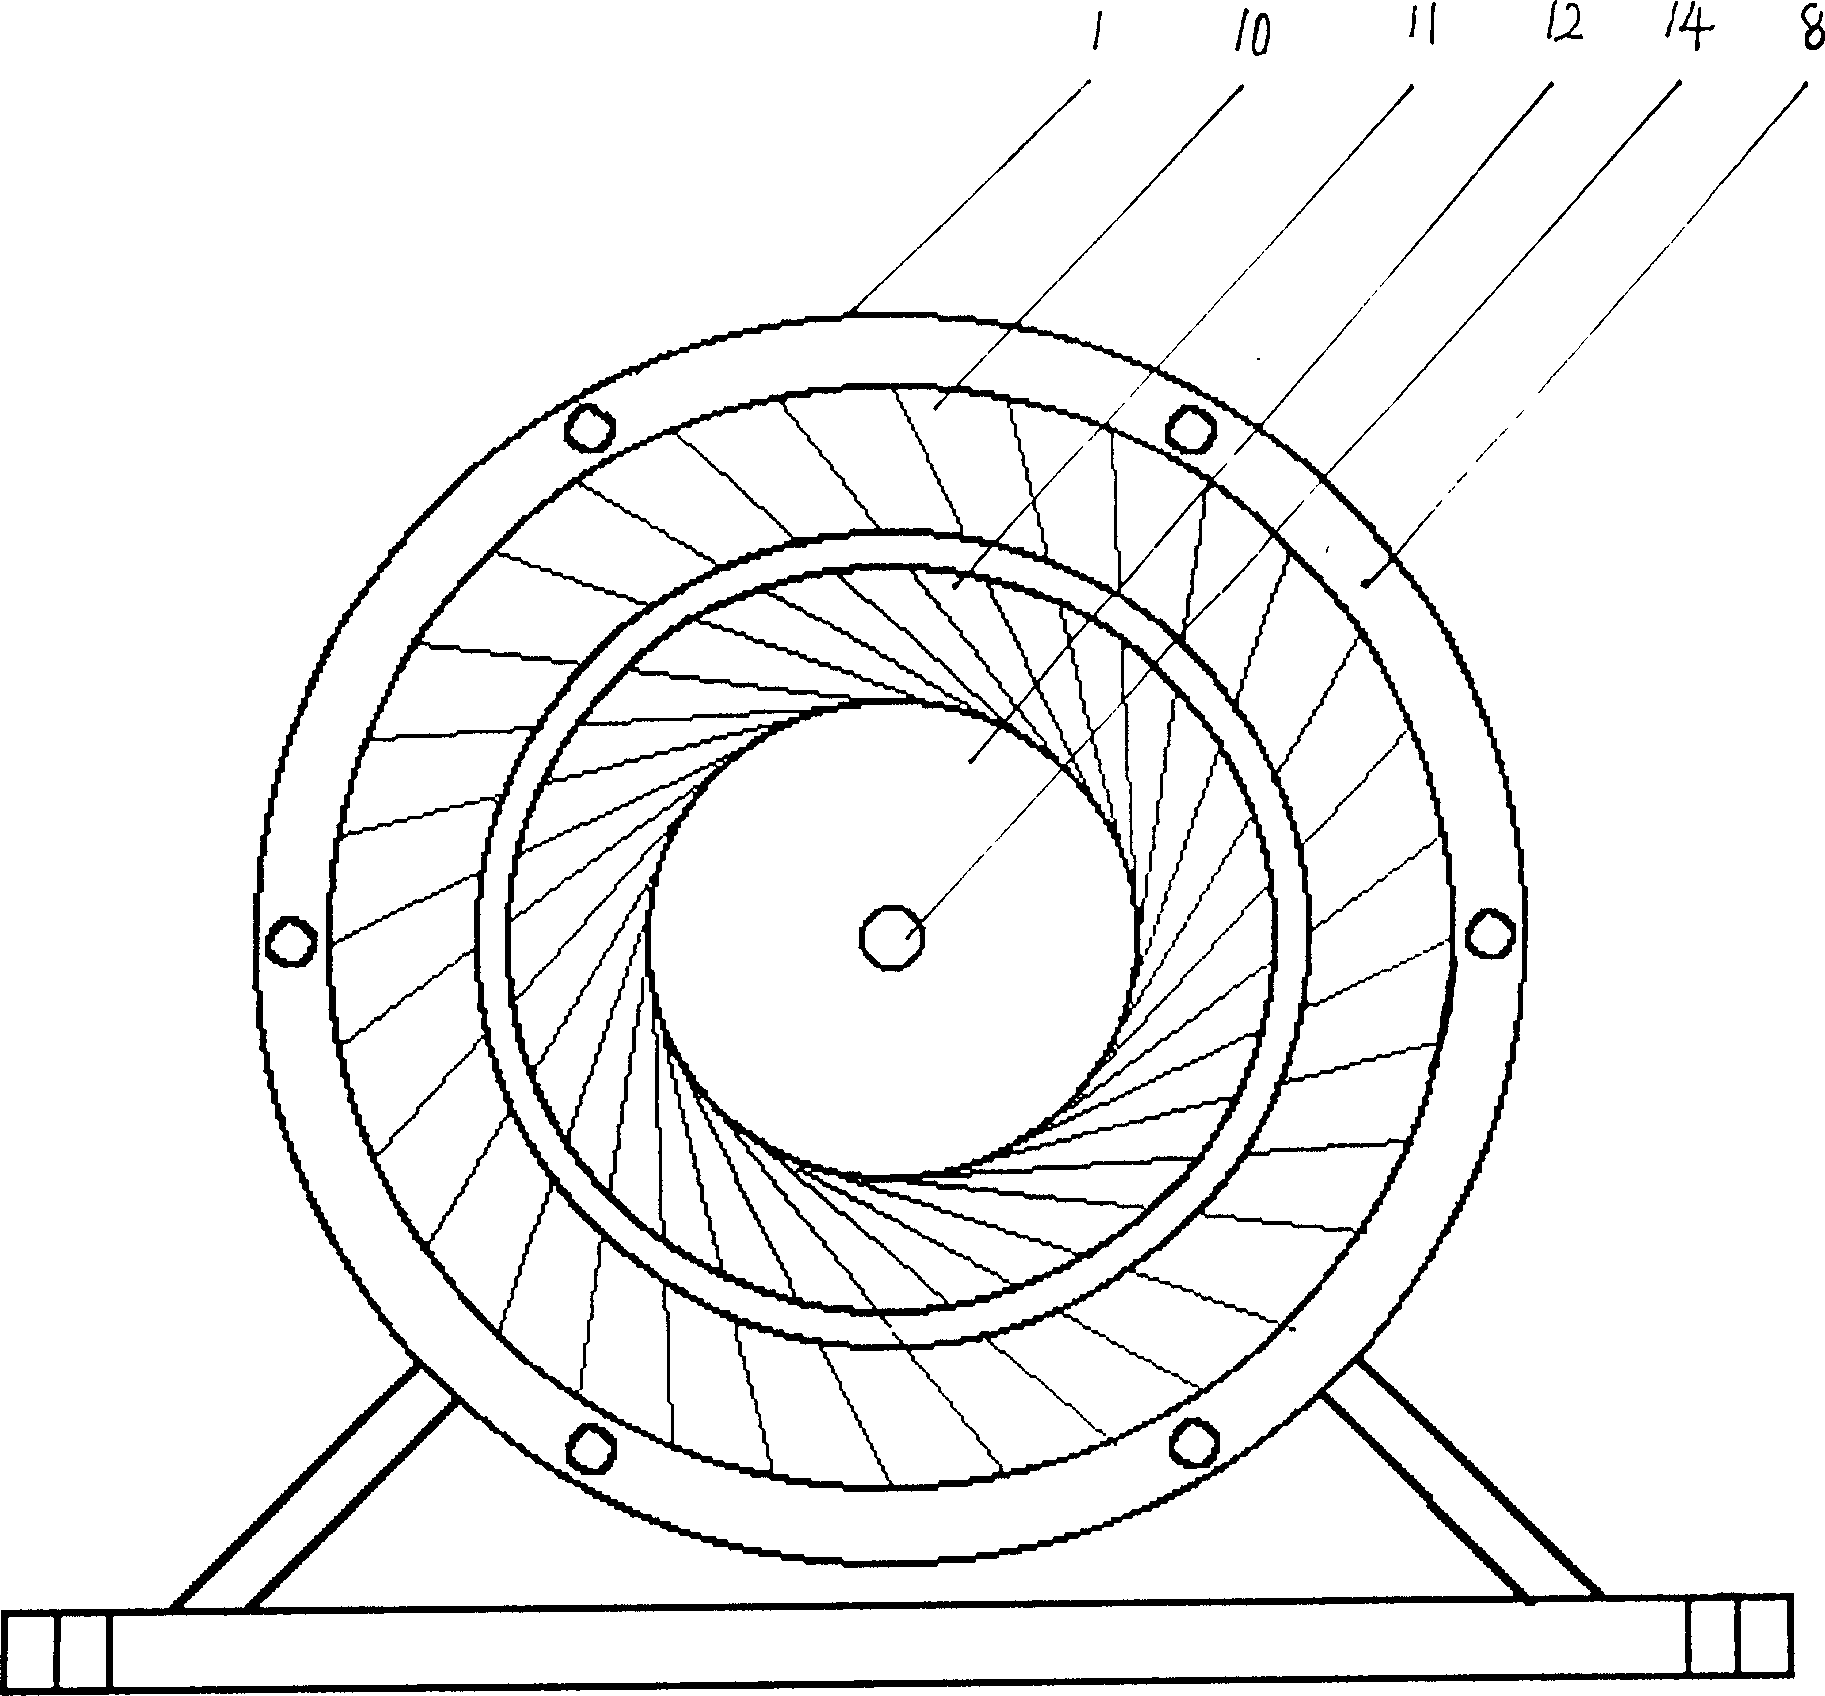 Electric permanent magnet motor